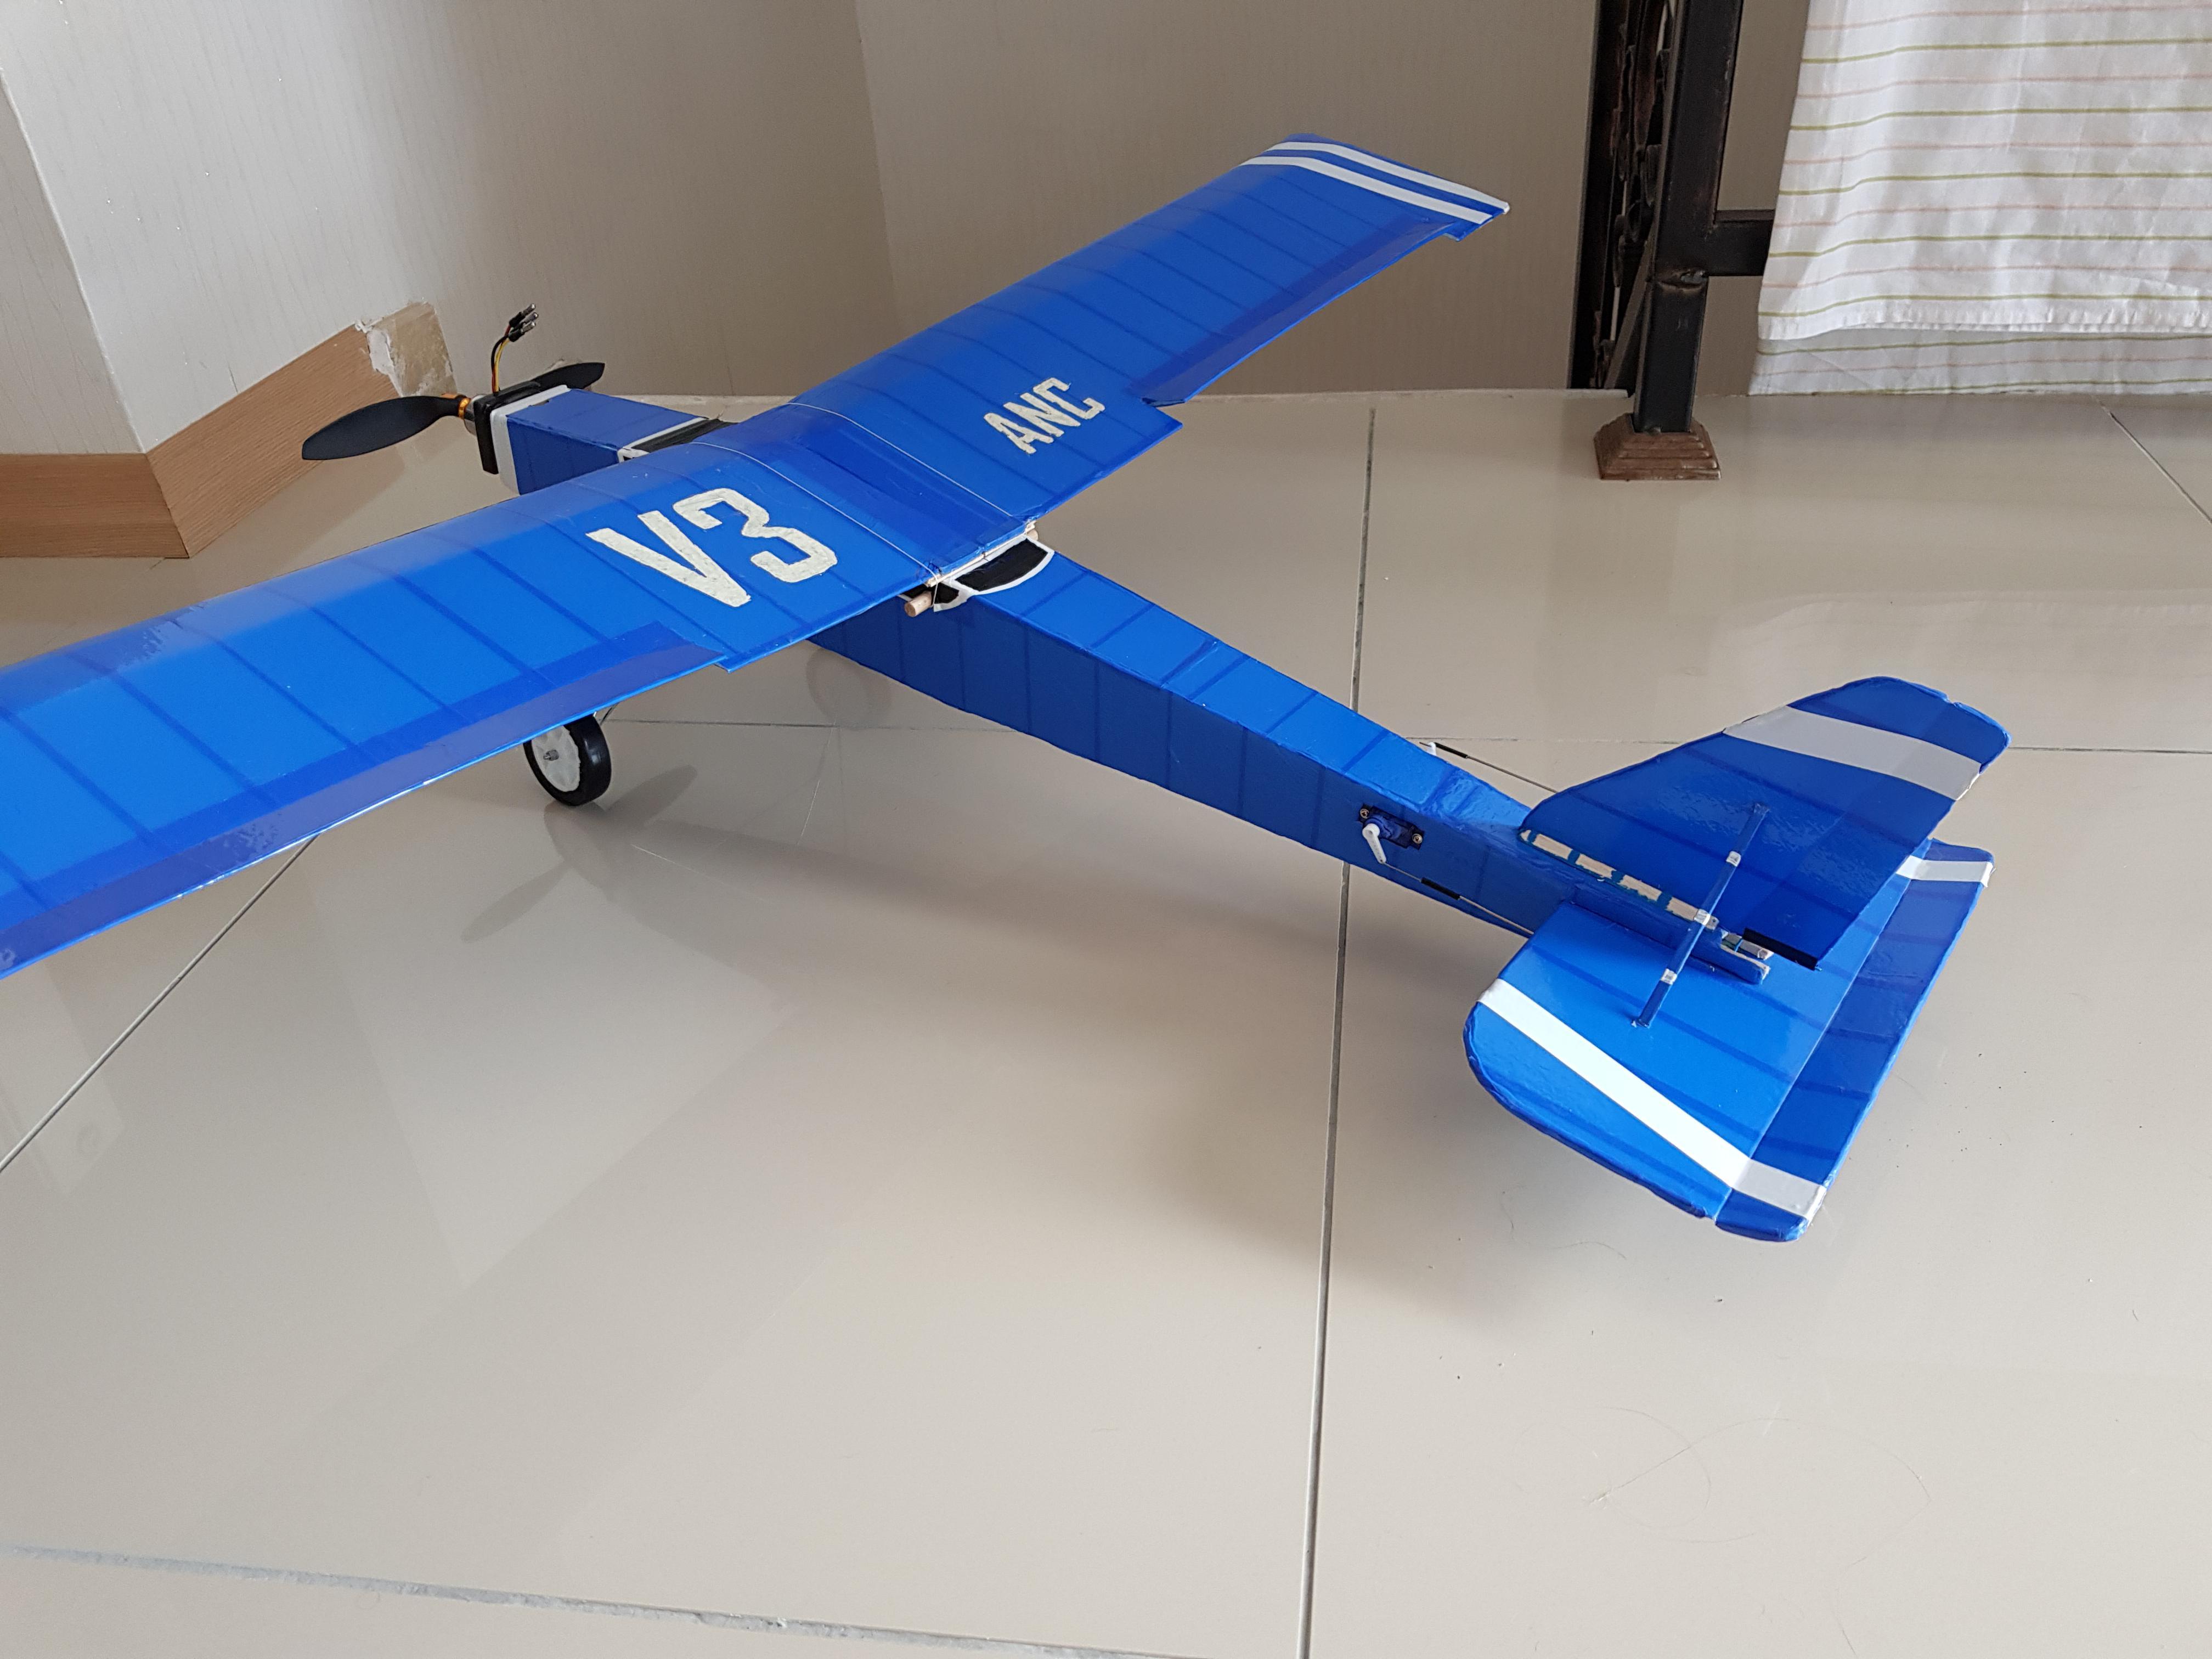 Reddit Rc Planes: Join an RC Plane Community for Expert Tips and Troubleshooting Help